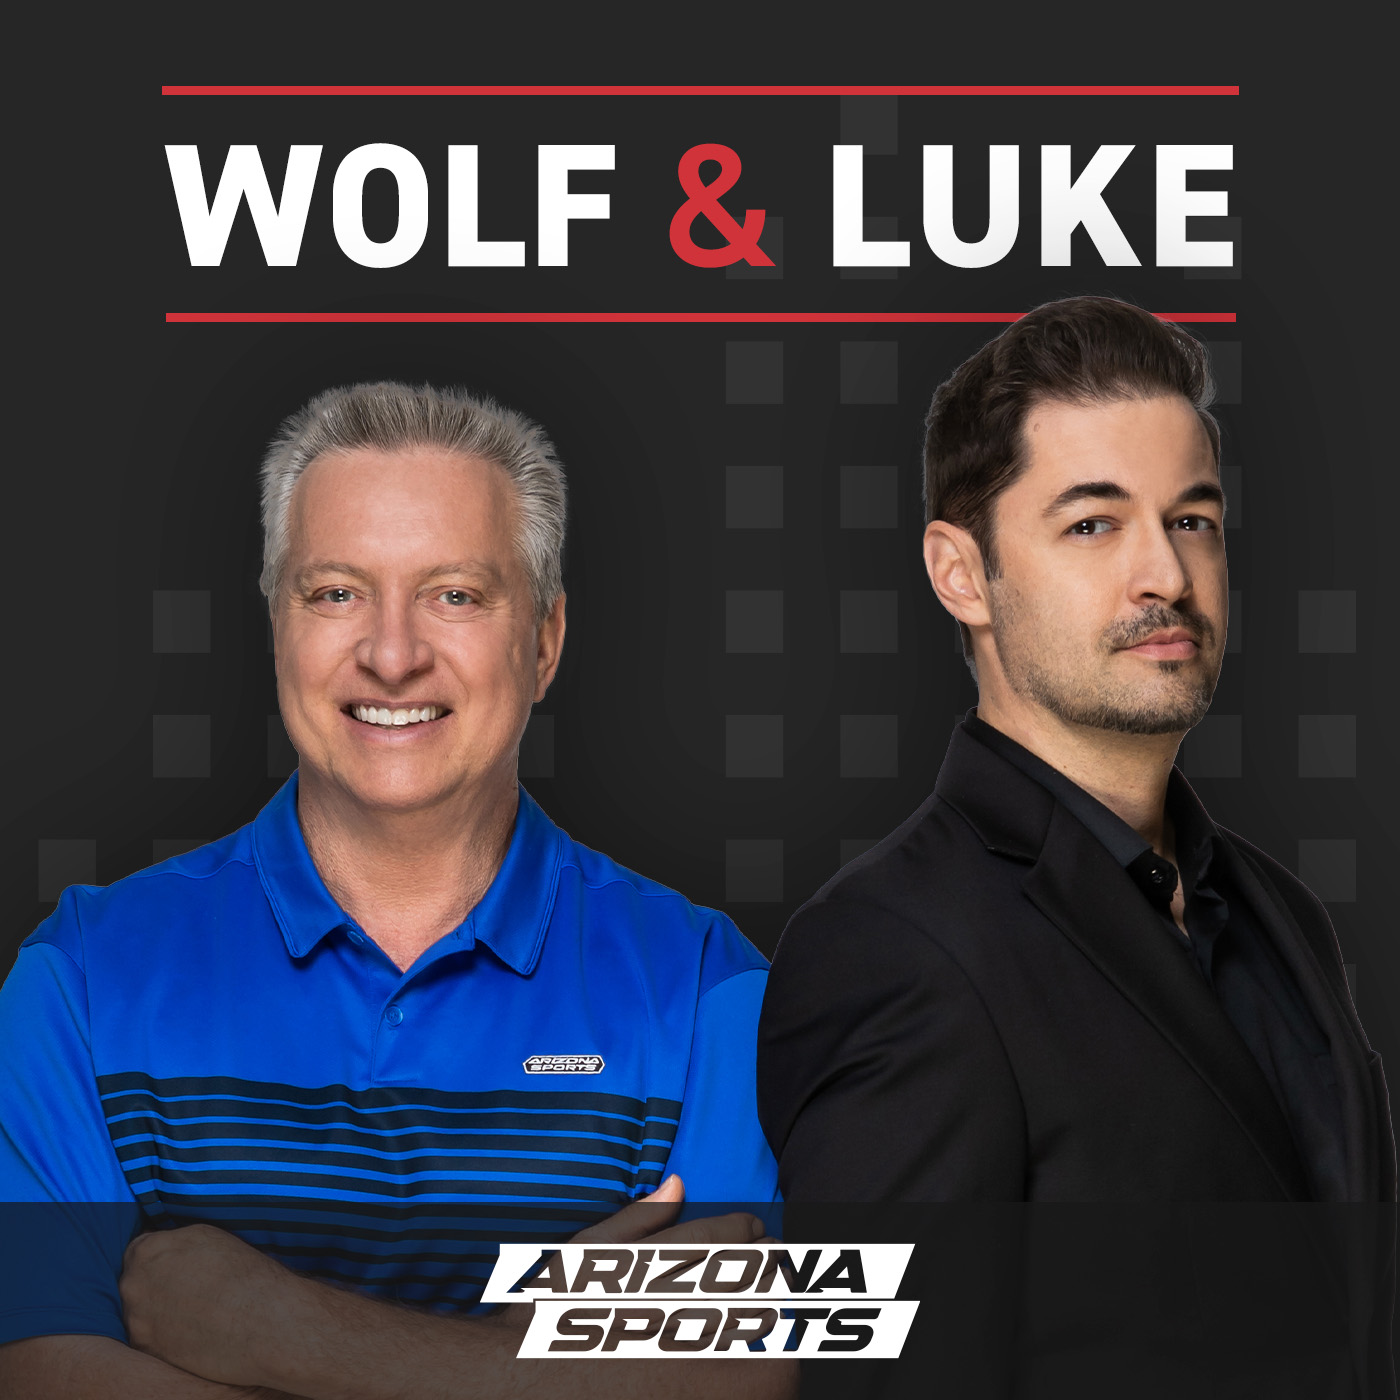 Wolf & Luke discuss how the Arizona Cardinals could upset the Dallas Cowboys